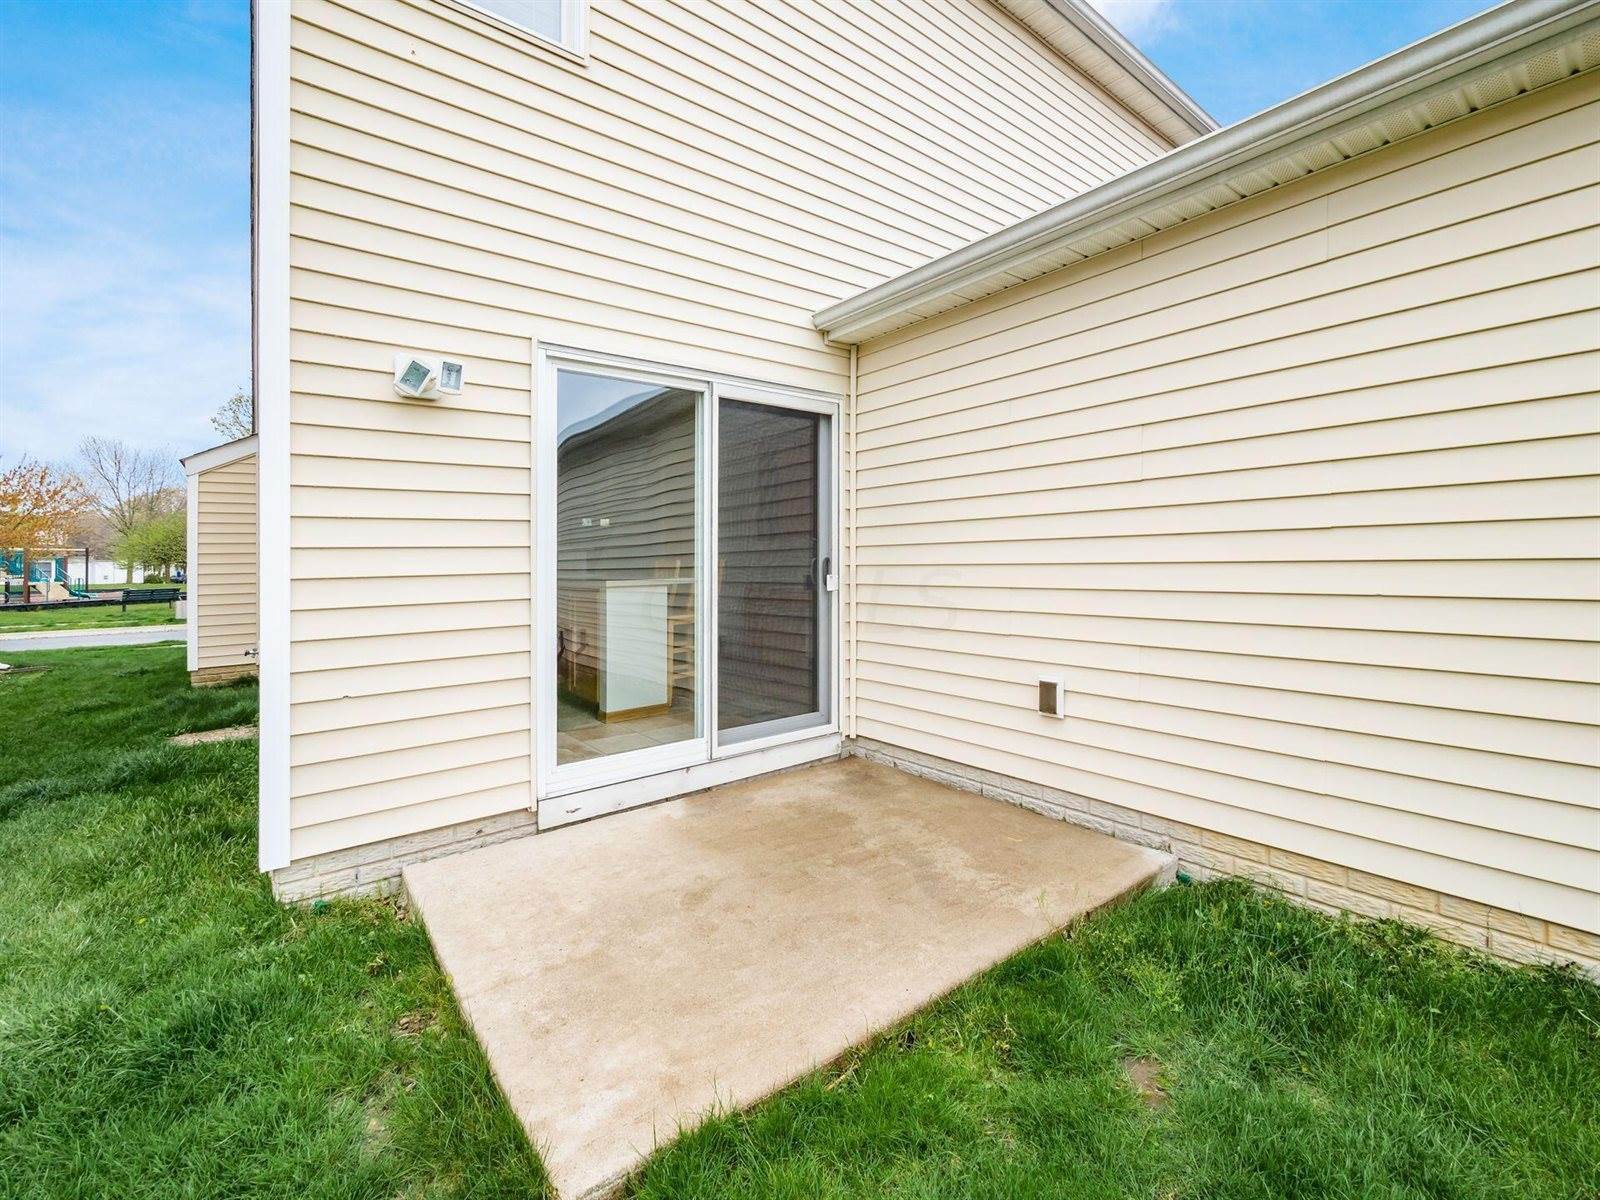 6209 Streaming Avenue, #186, Galloway, OH 43119